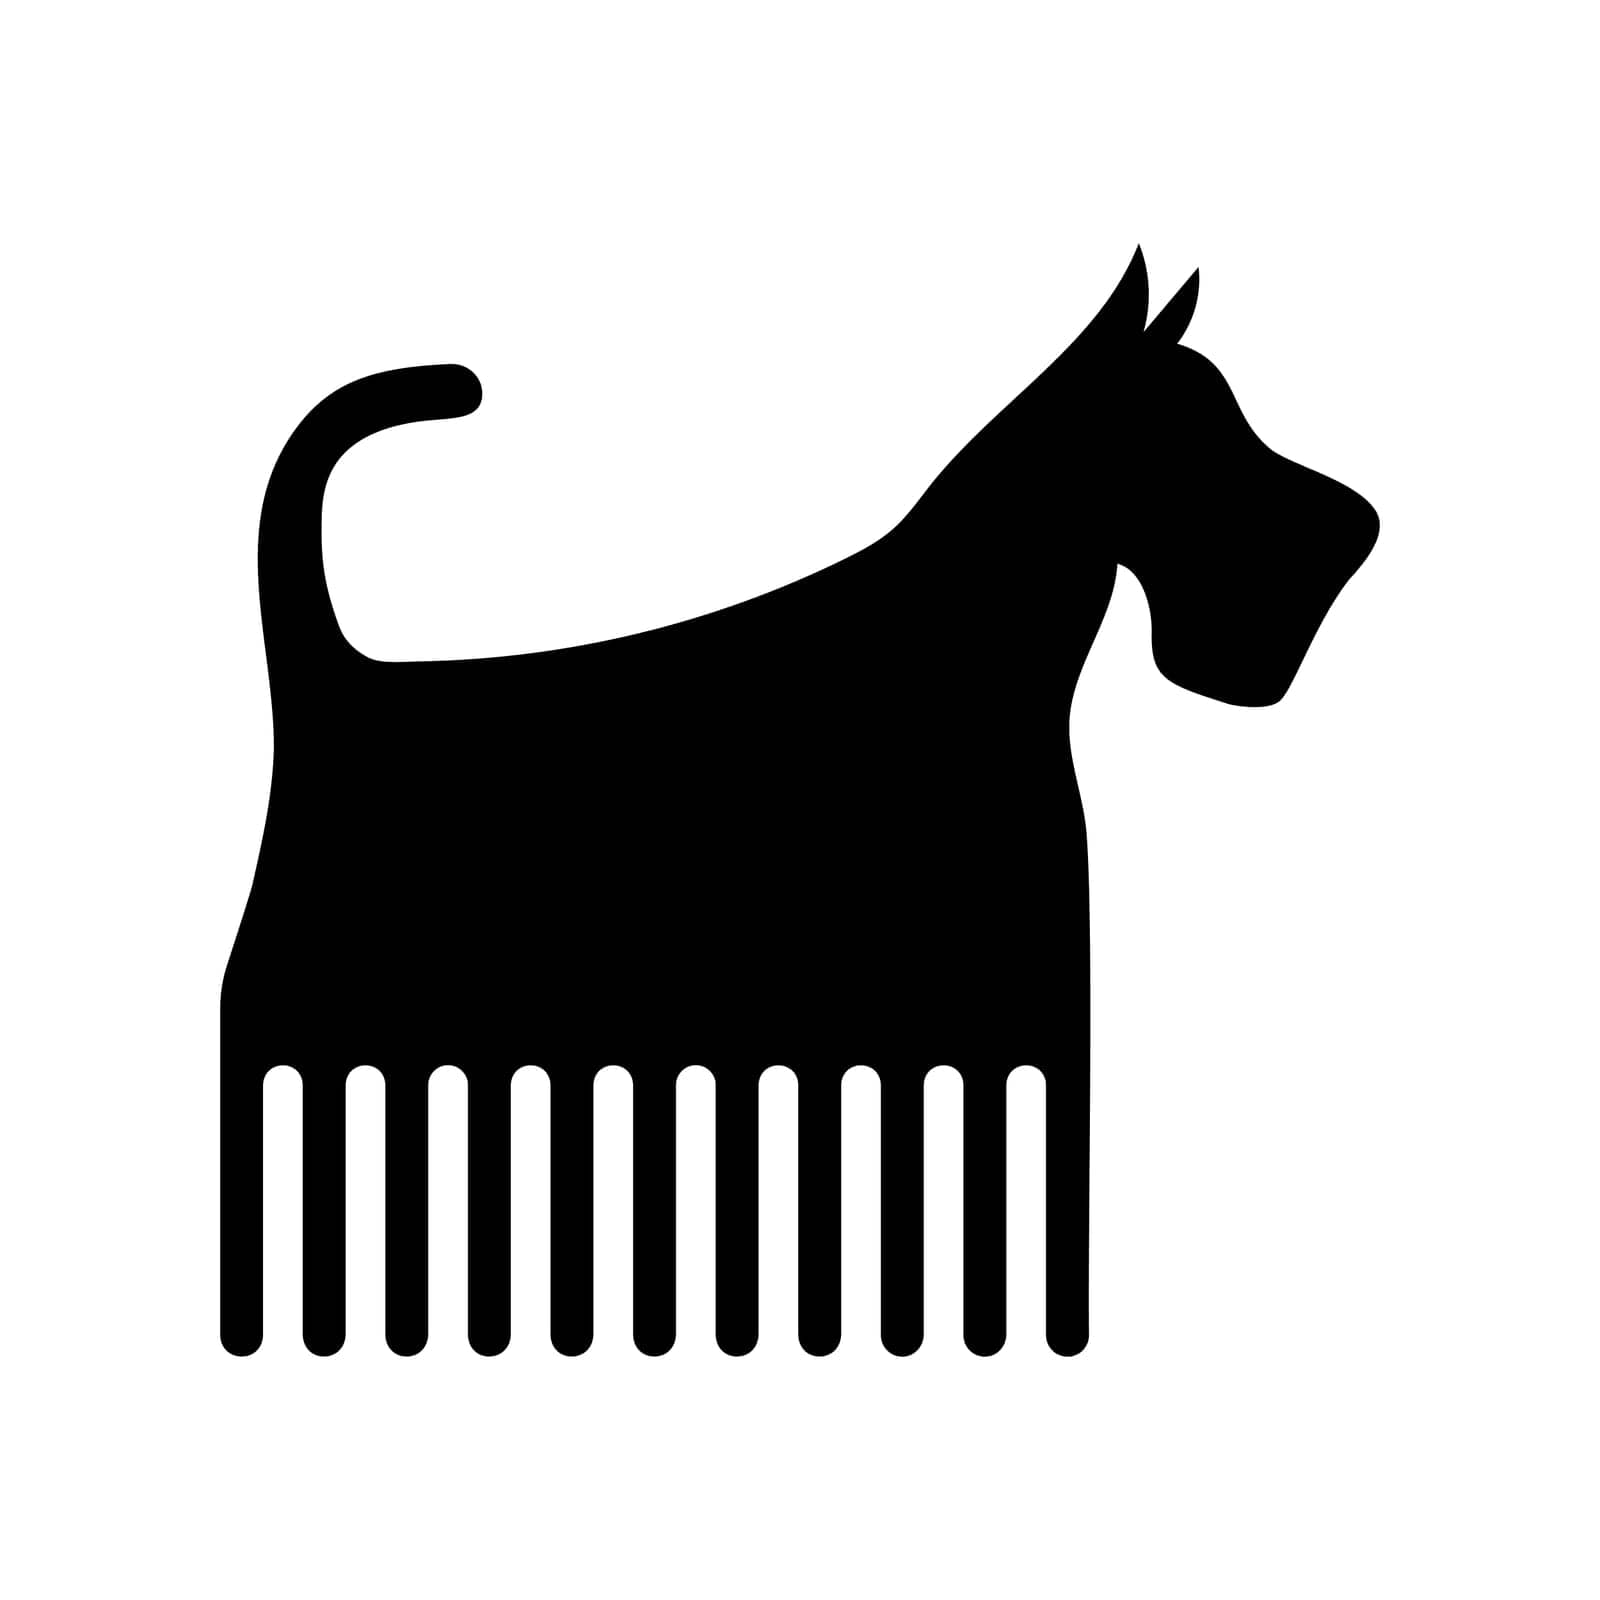 Dog groomer icon. Puppy silhouette united with comb. Pet hairdresser salon symbol. Vector illustration.